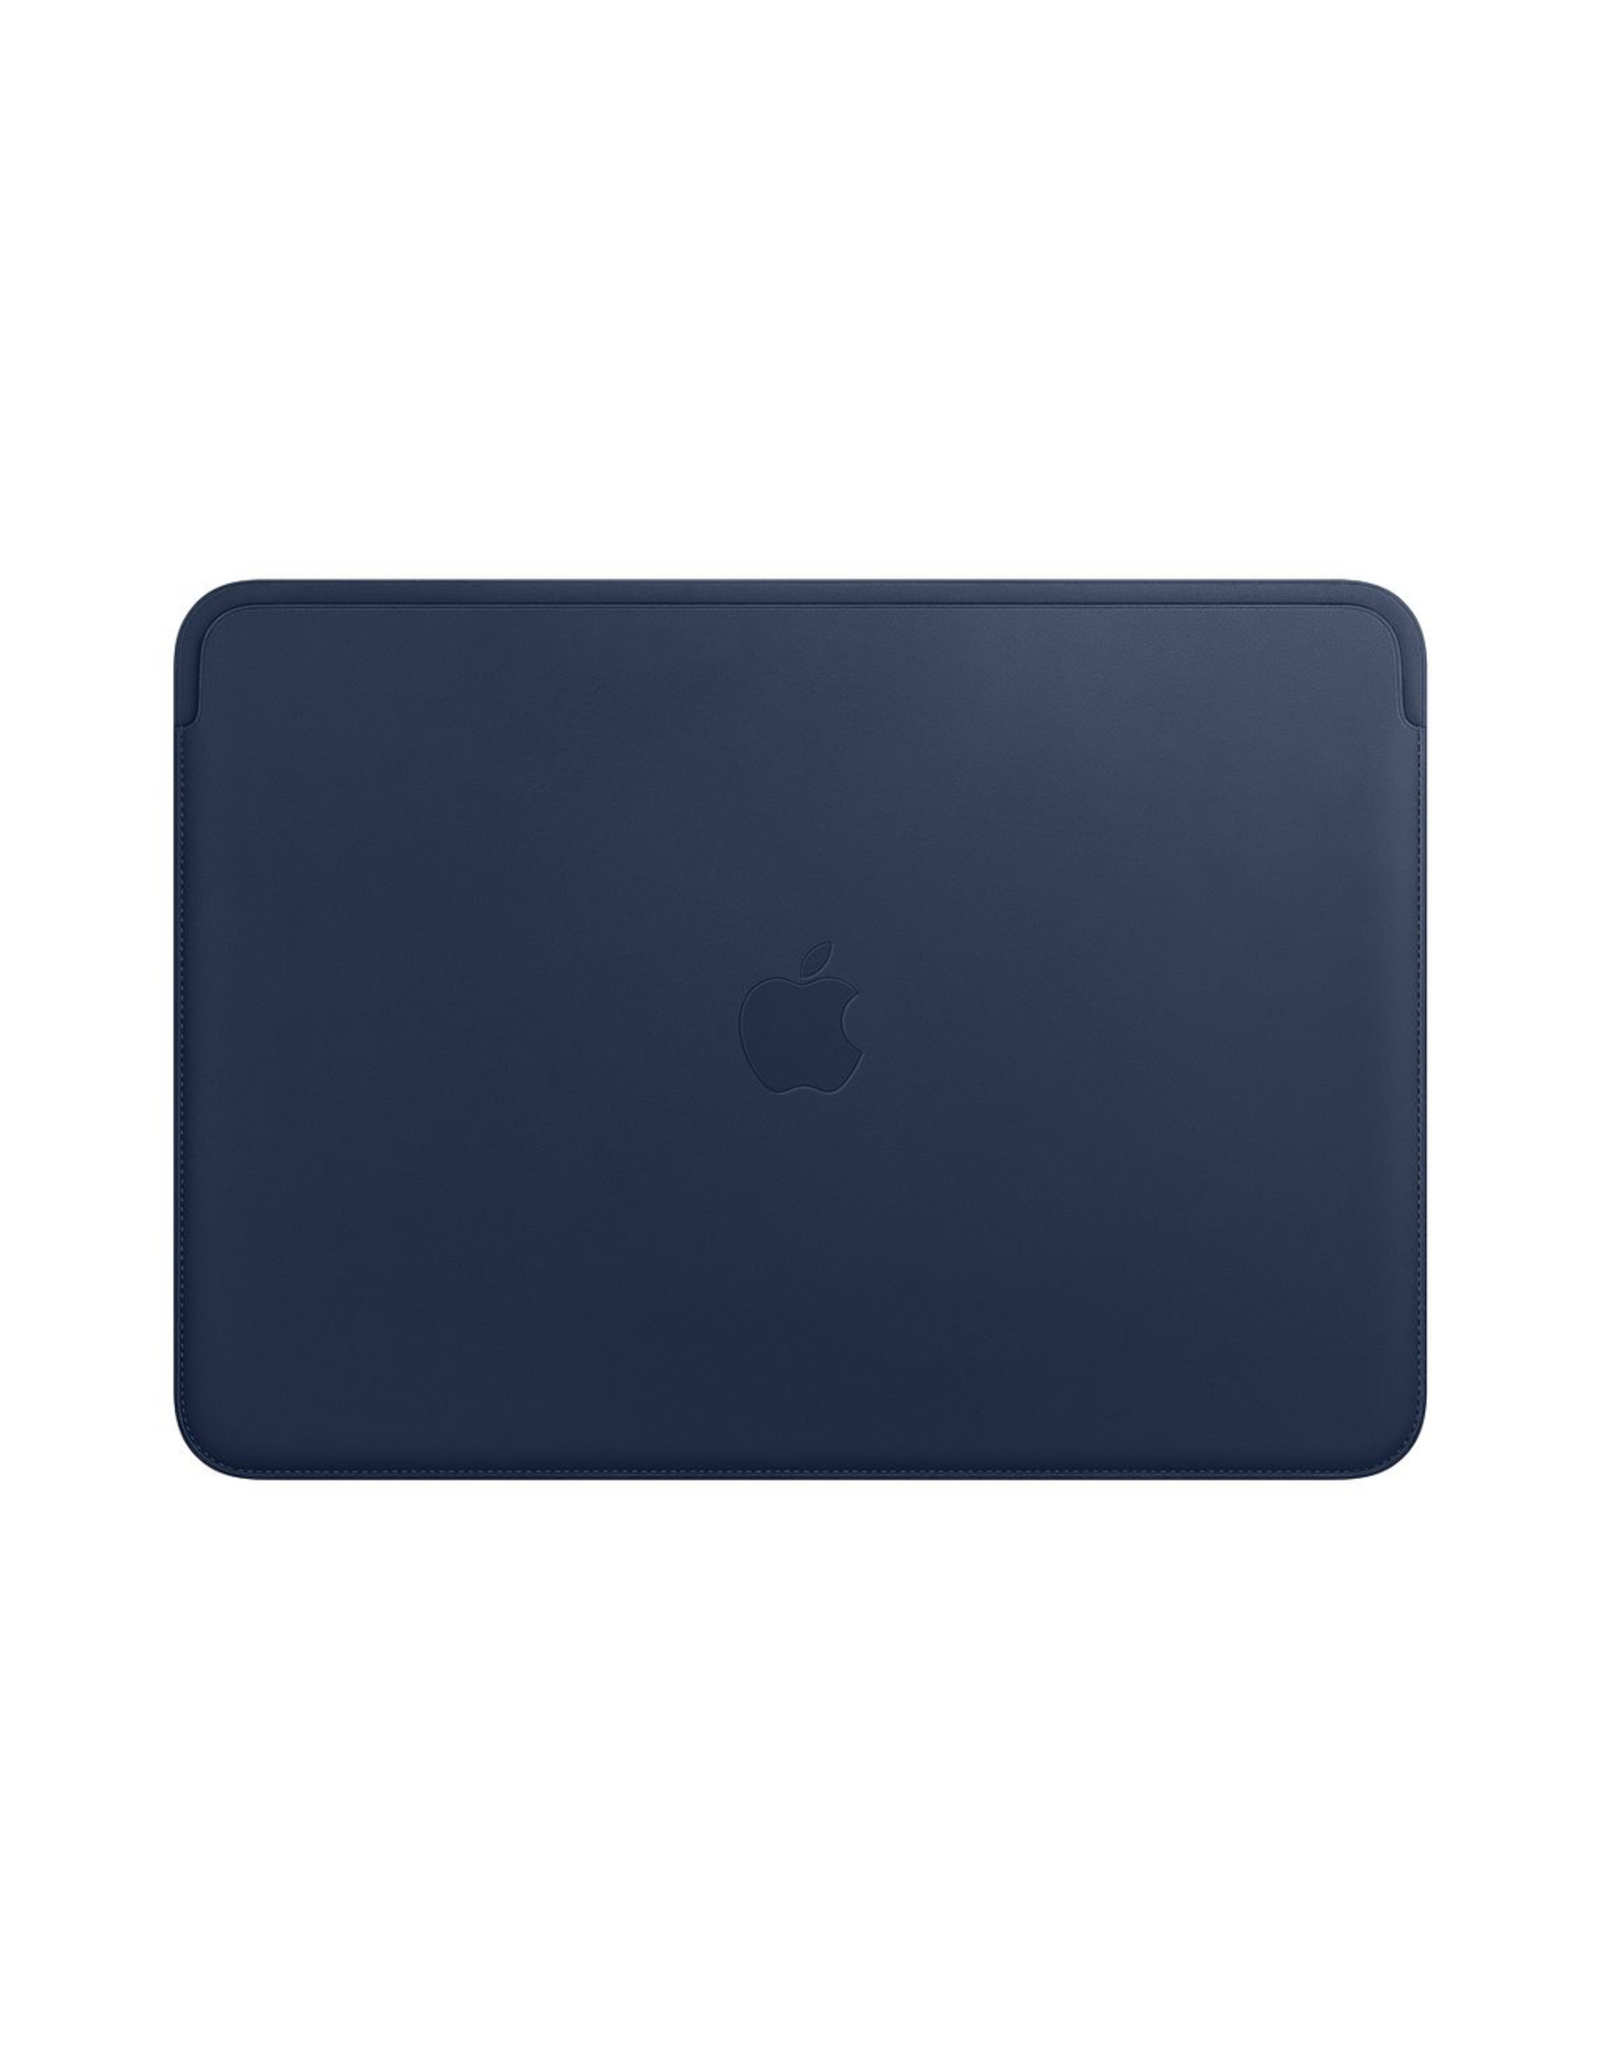 Apple Apple Leather Sleeve for 13-inch MacBook Pro - Midnight Blue